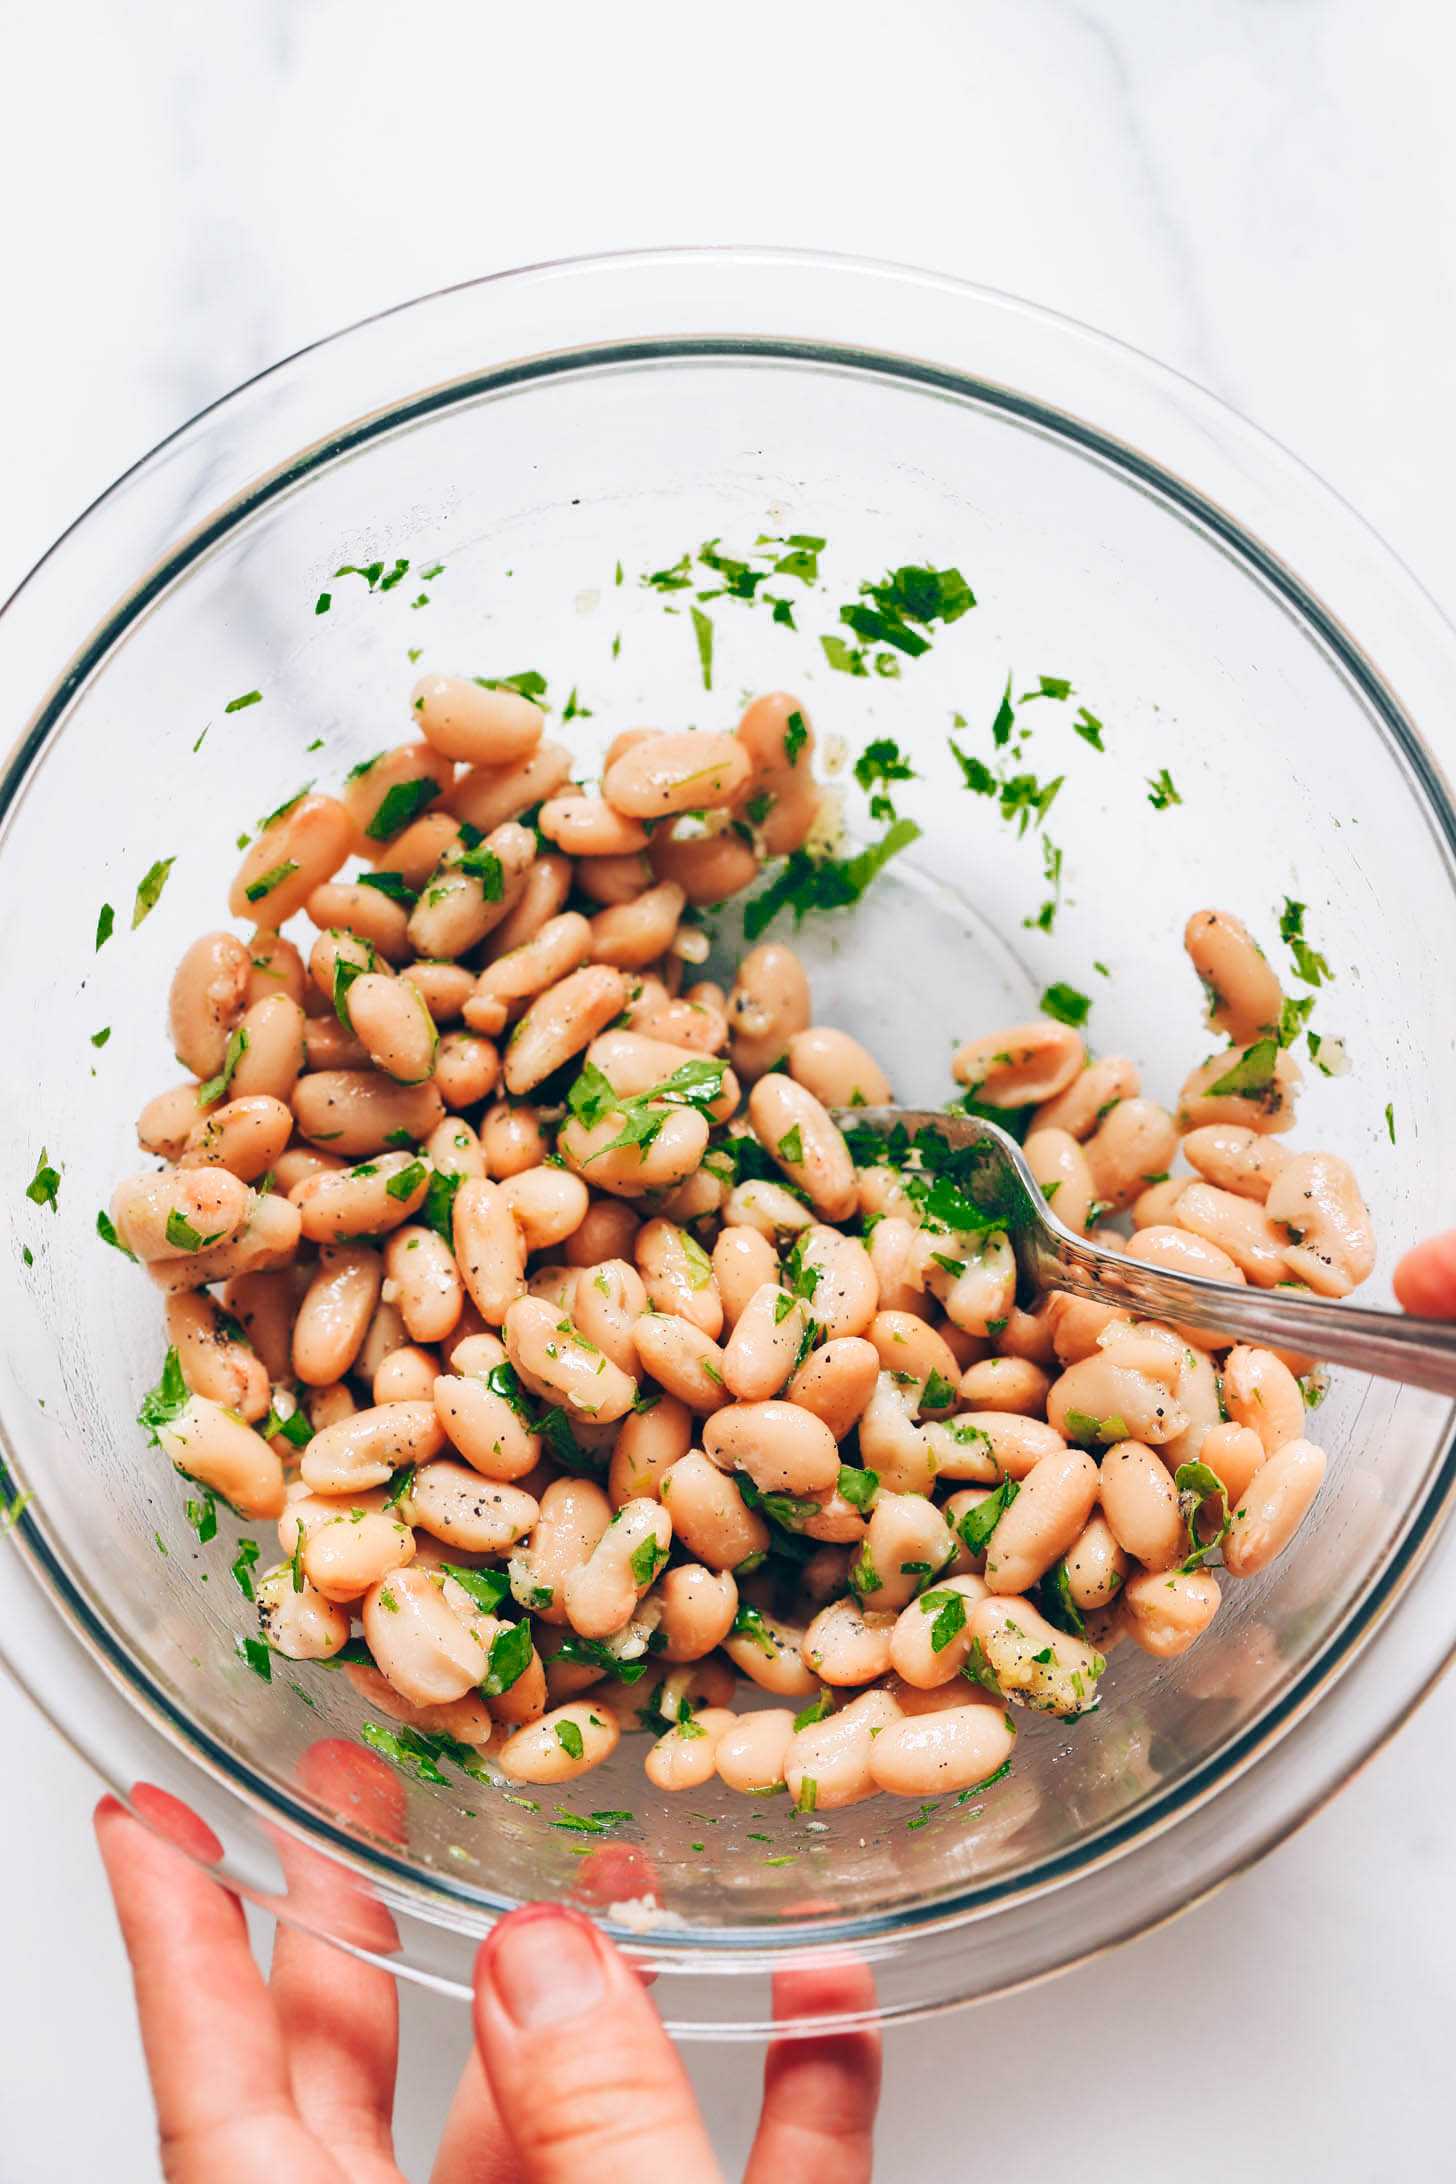 White beans mixed with garlic, lemon juice, olive oil, salt, pepper, and parsley